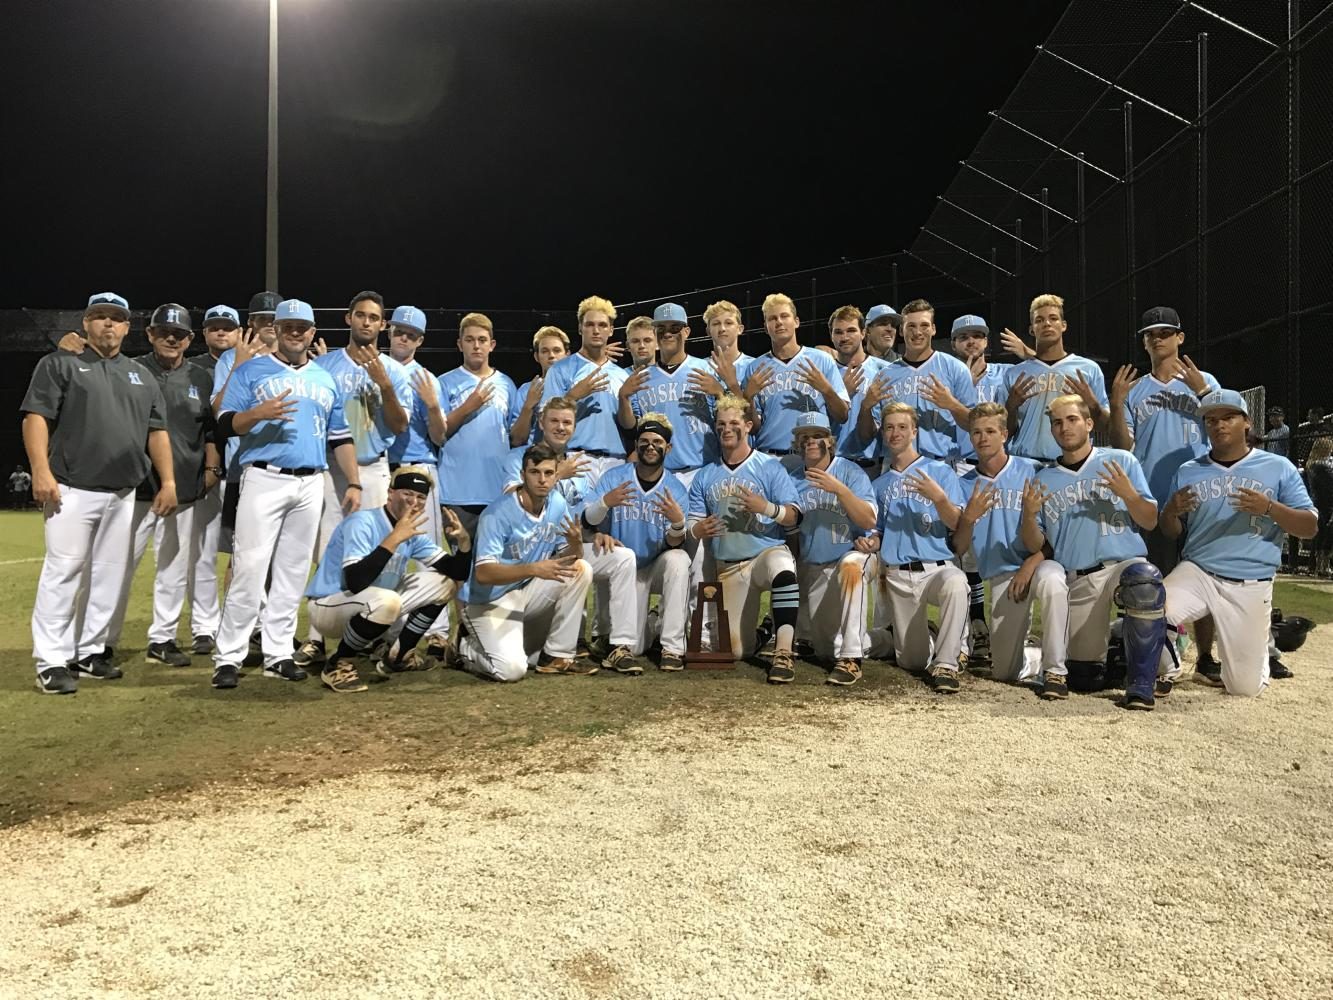 The varsity baseball team poses with the district championship trophy. They beat Lake Howell 13-3.